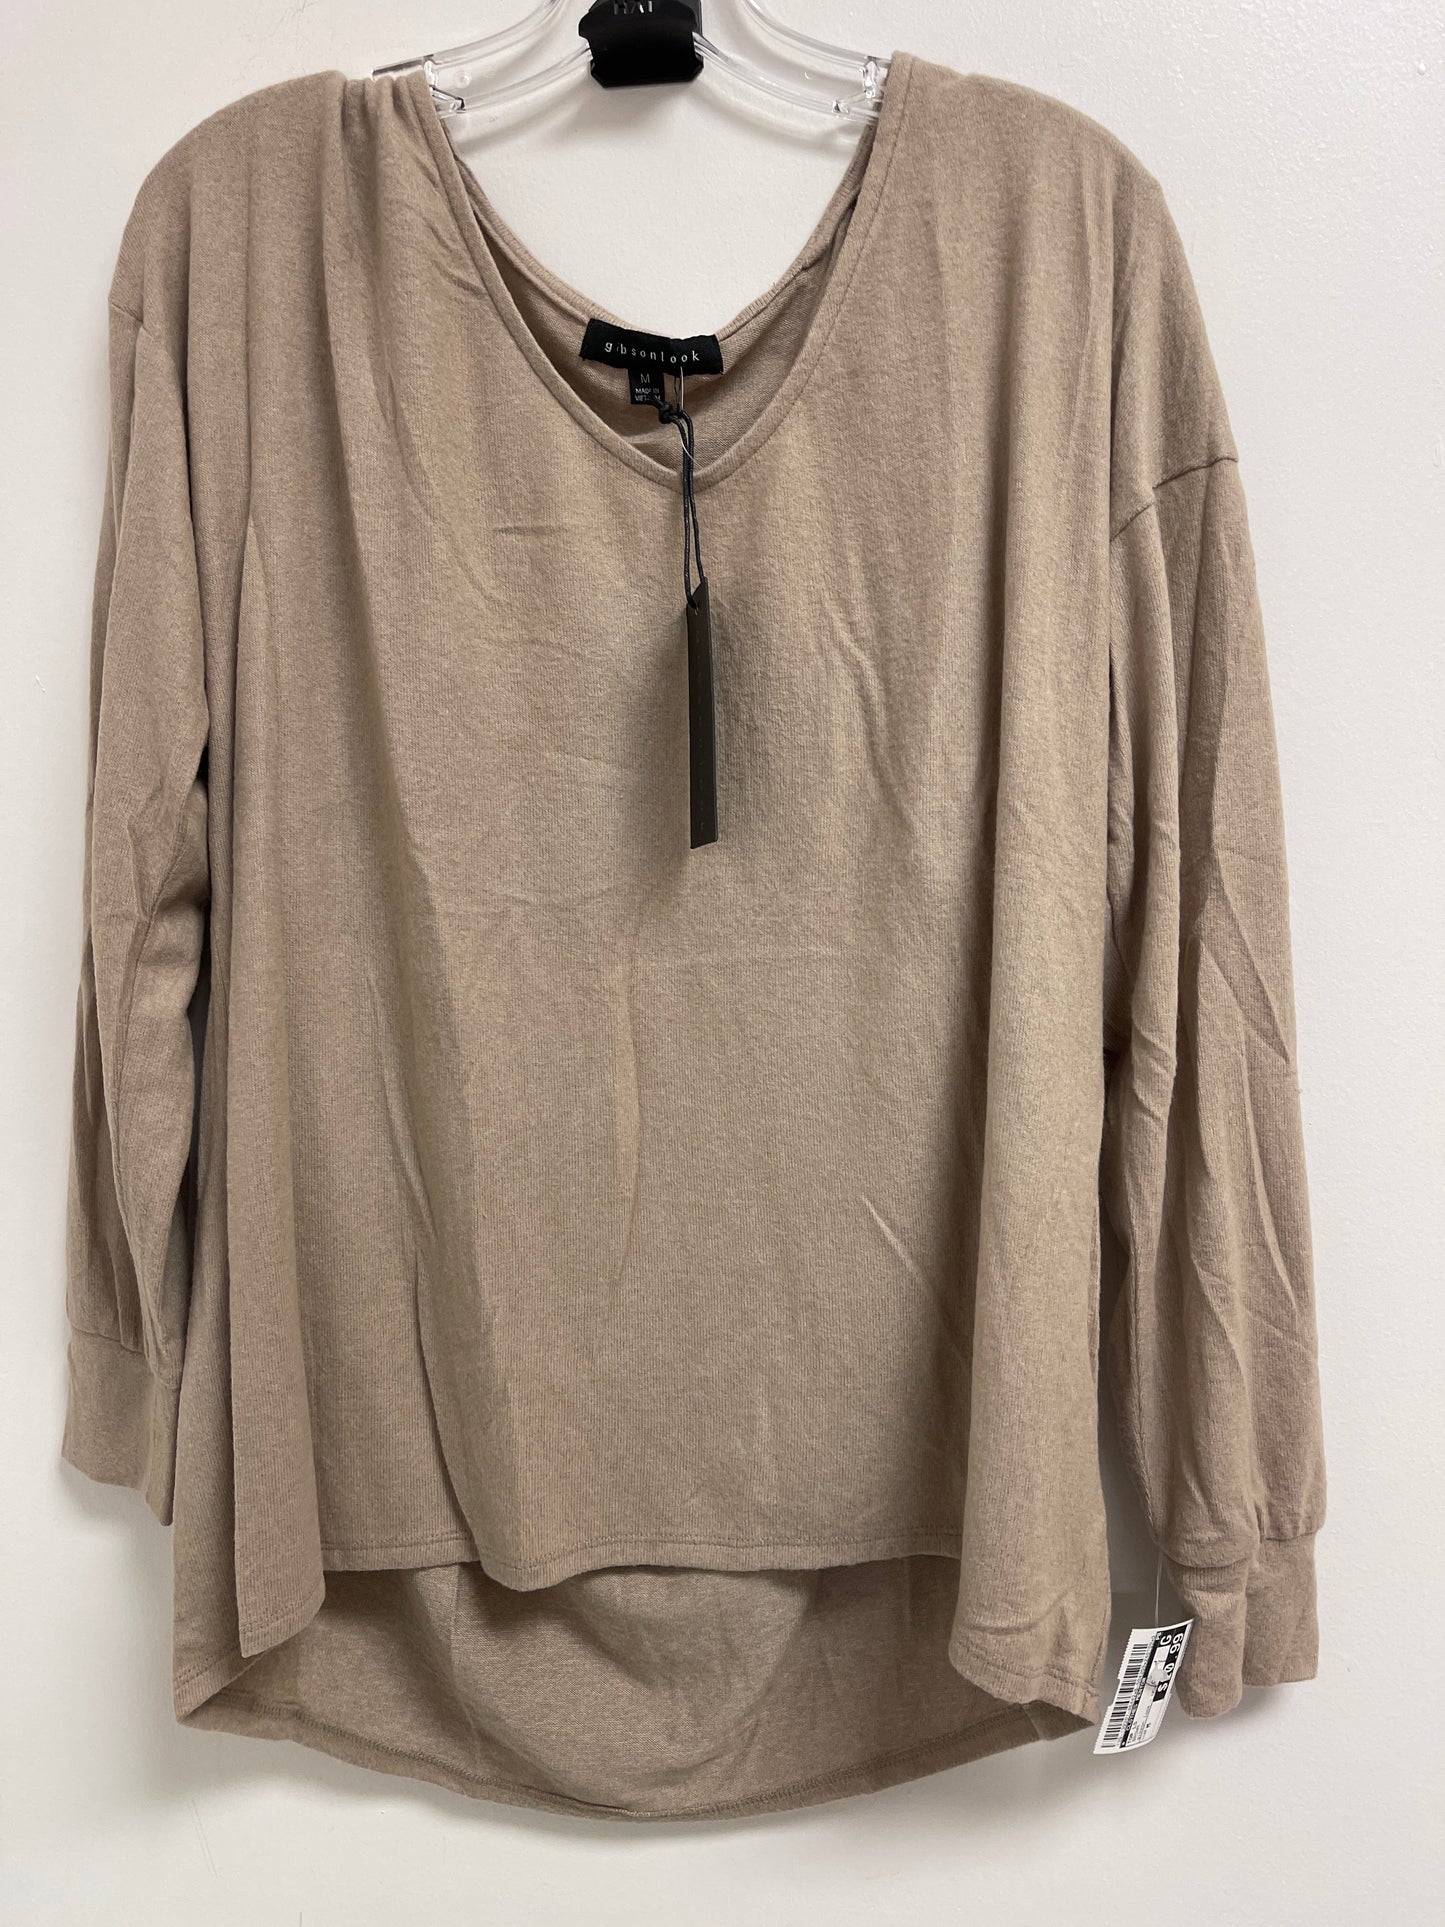 Brown Top Long Sleeve Clothes Mentor, Size M